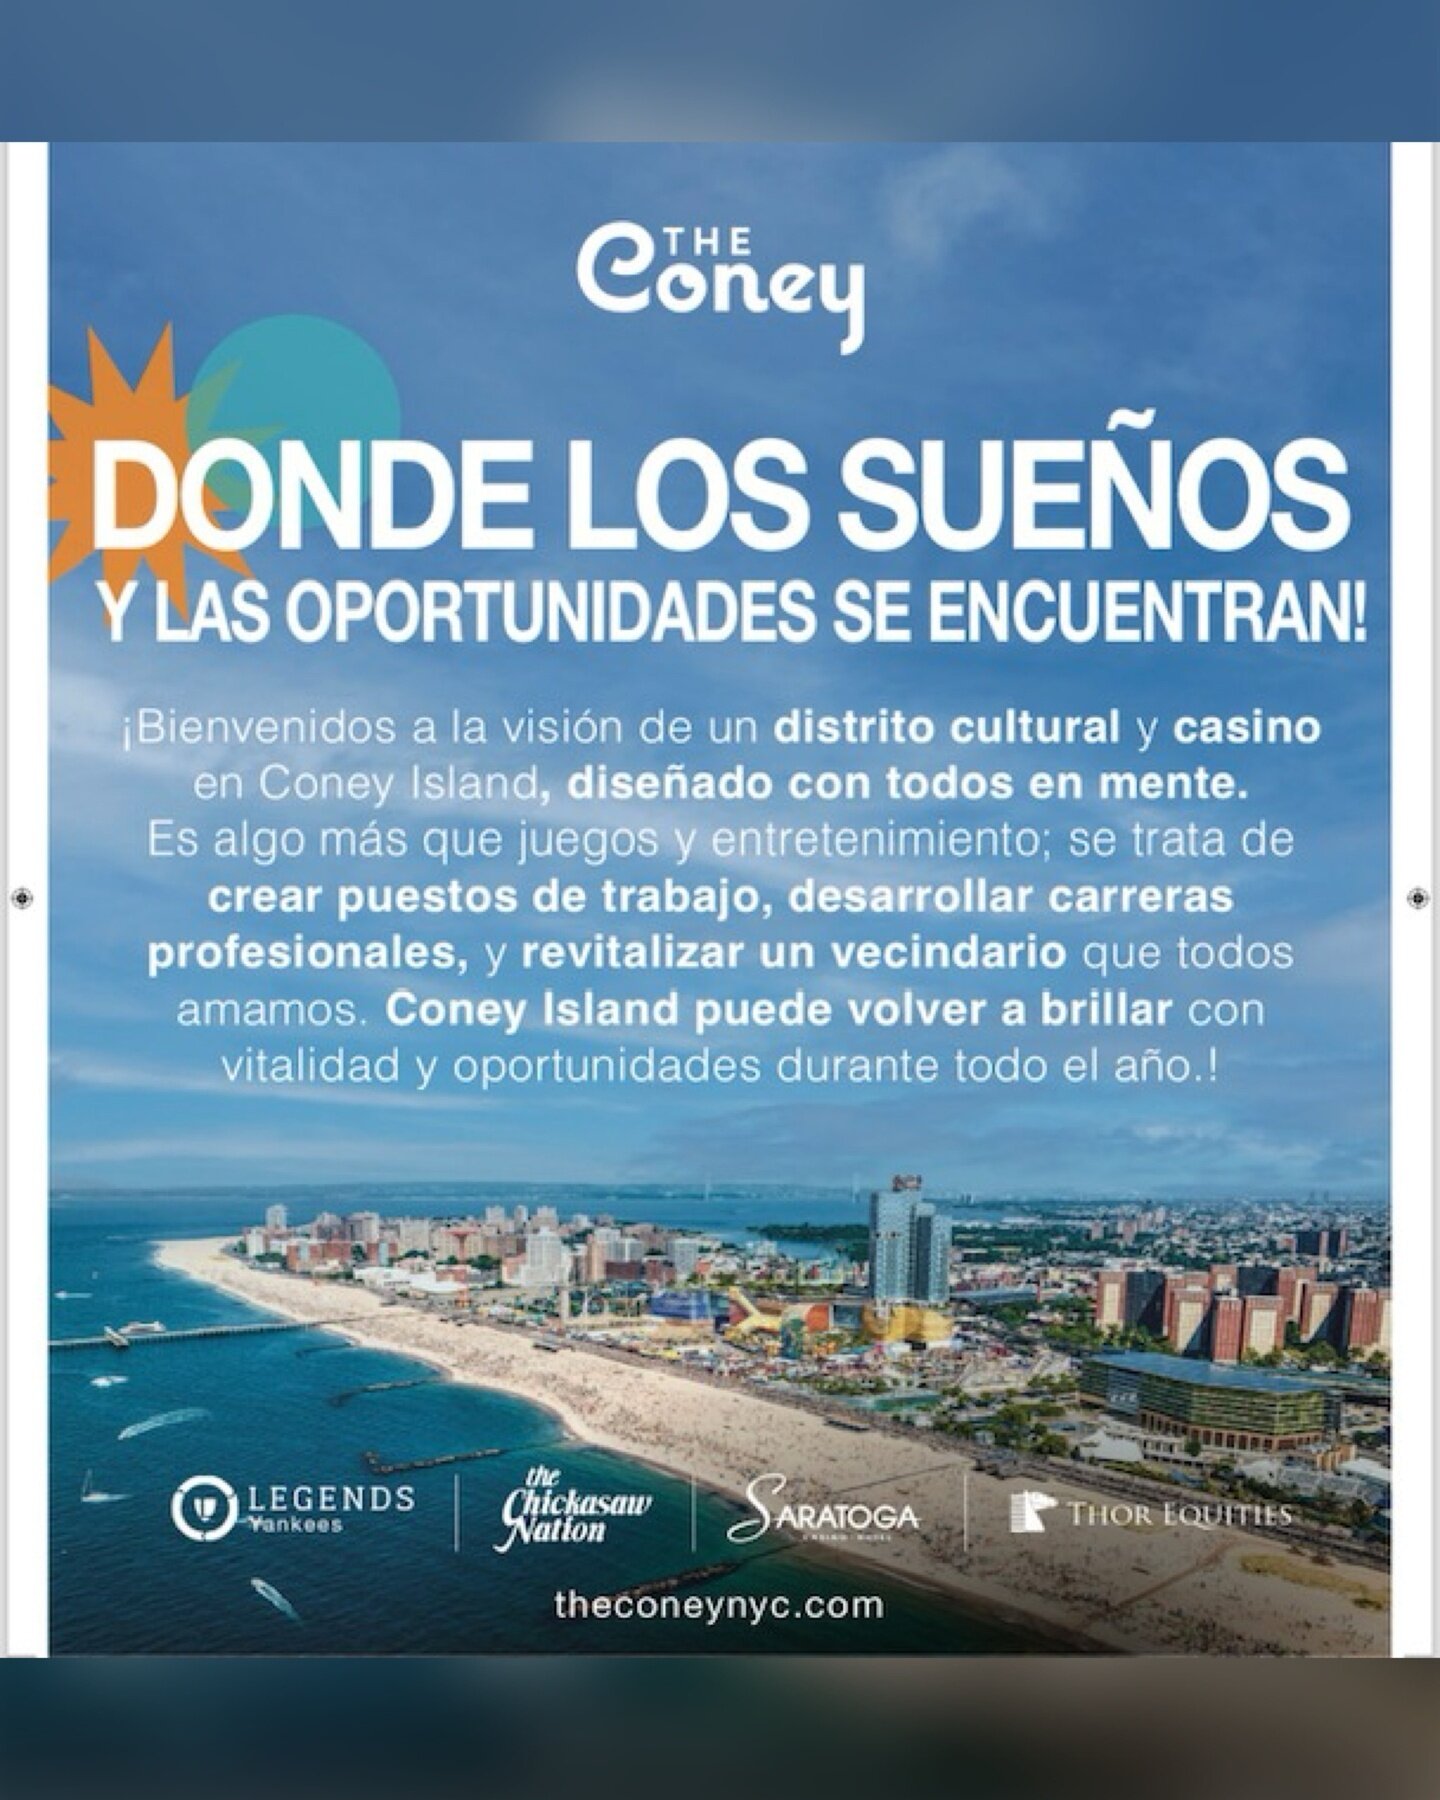 The Coney is featured in the latest edition of @elespecialitony!

This feature, which our team helped deliver to Coney Island residents and is available in Brooklyn, highlights our heartfelt proposal to bring more than just fun to our community. We'r